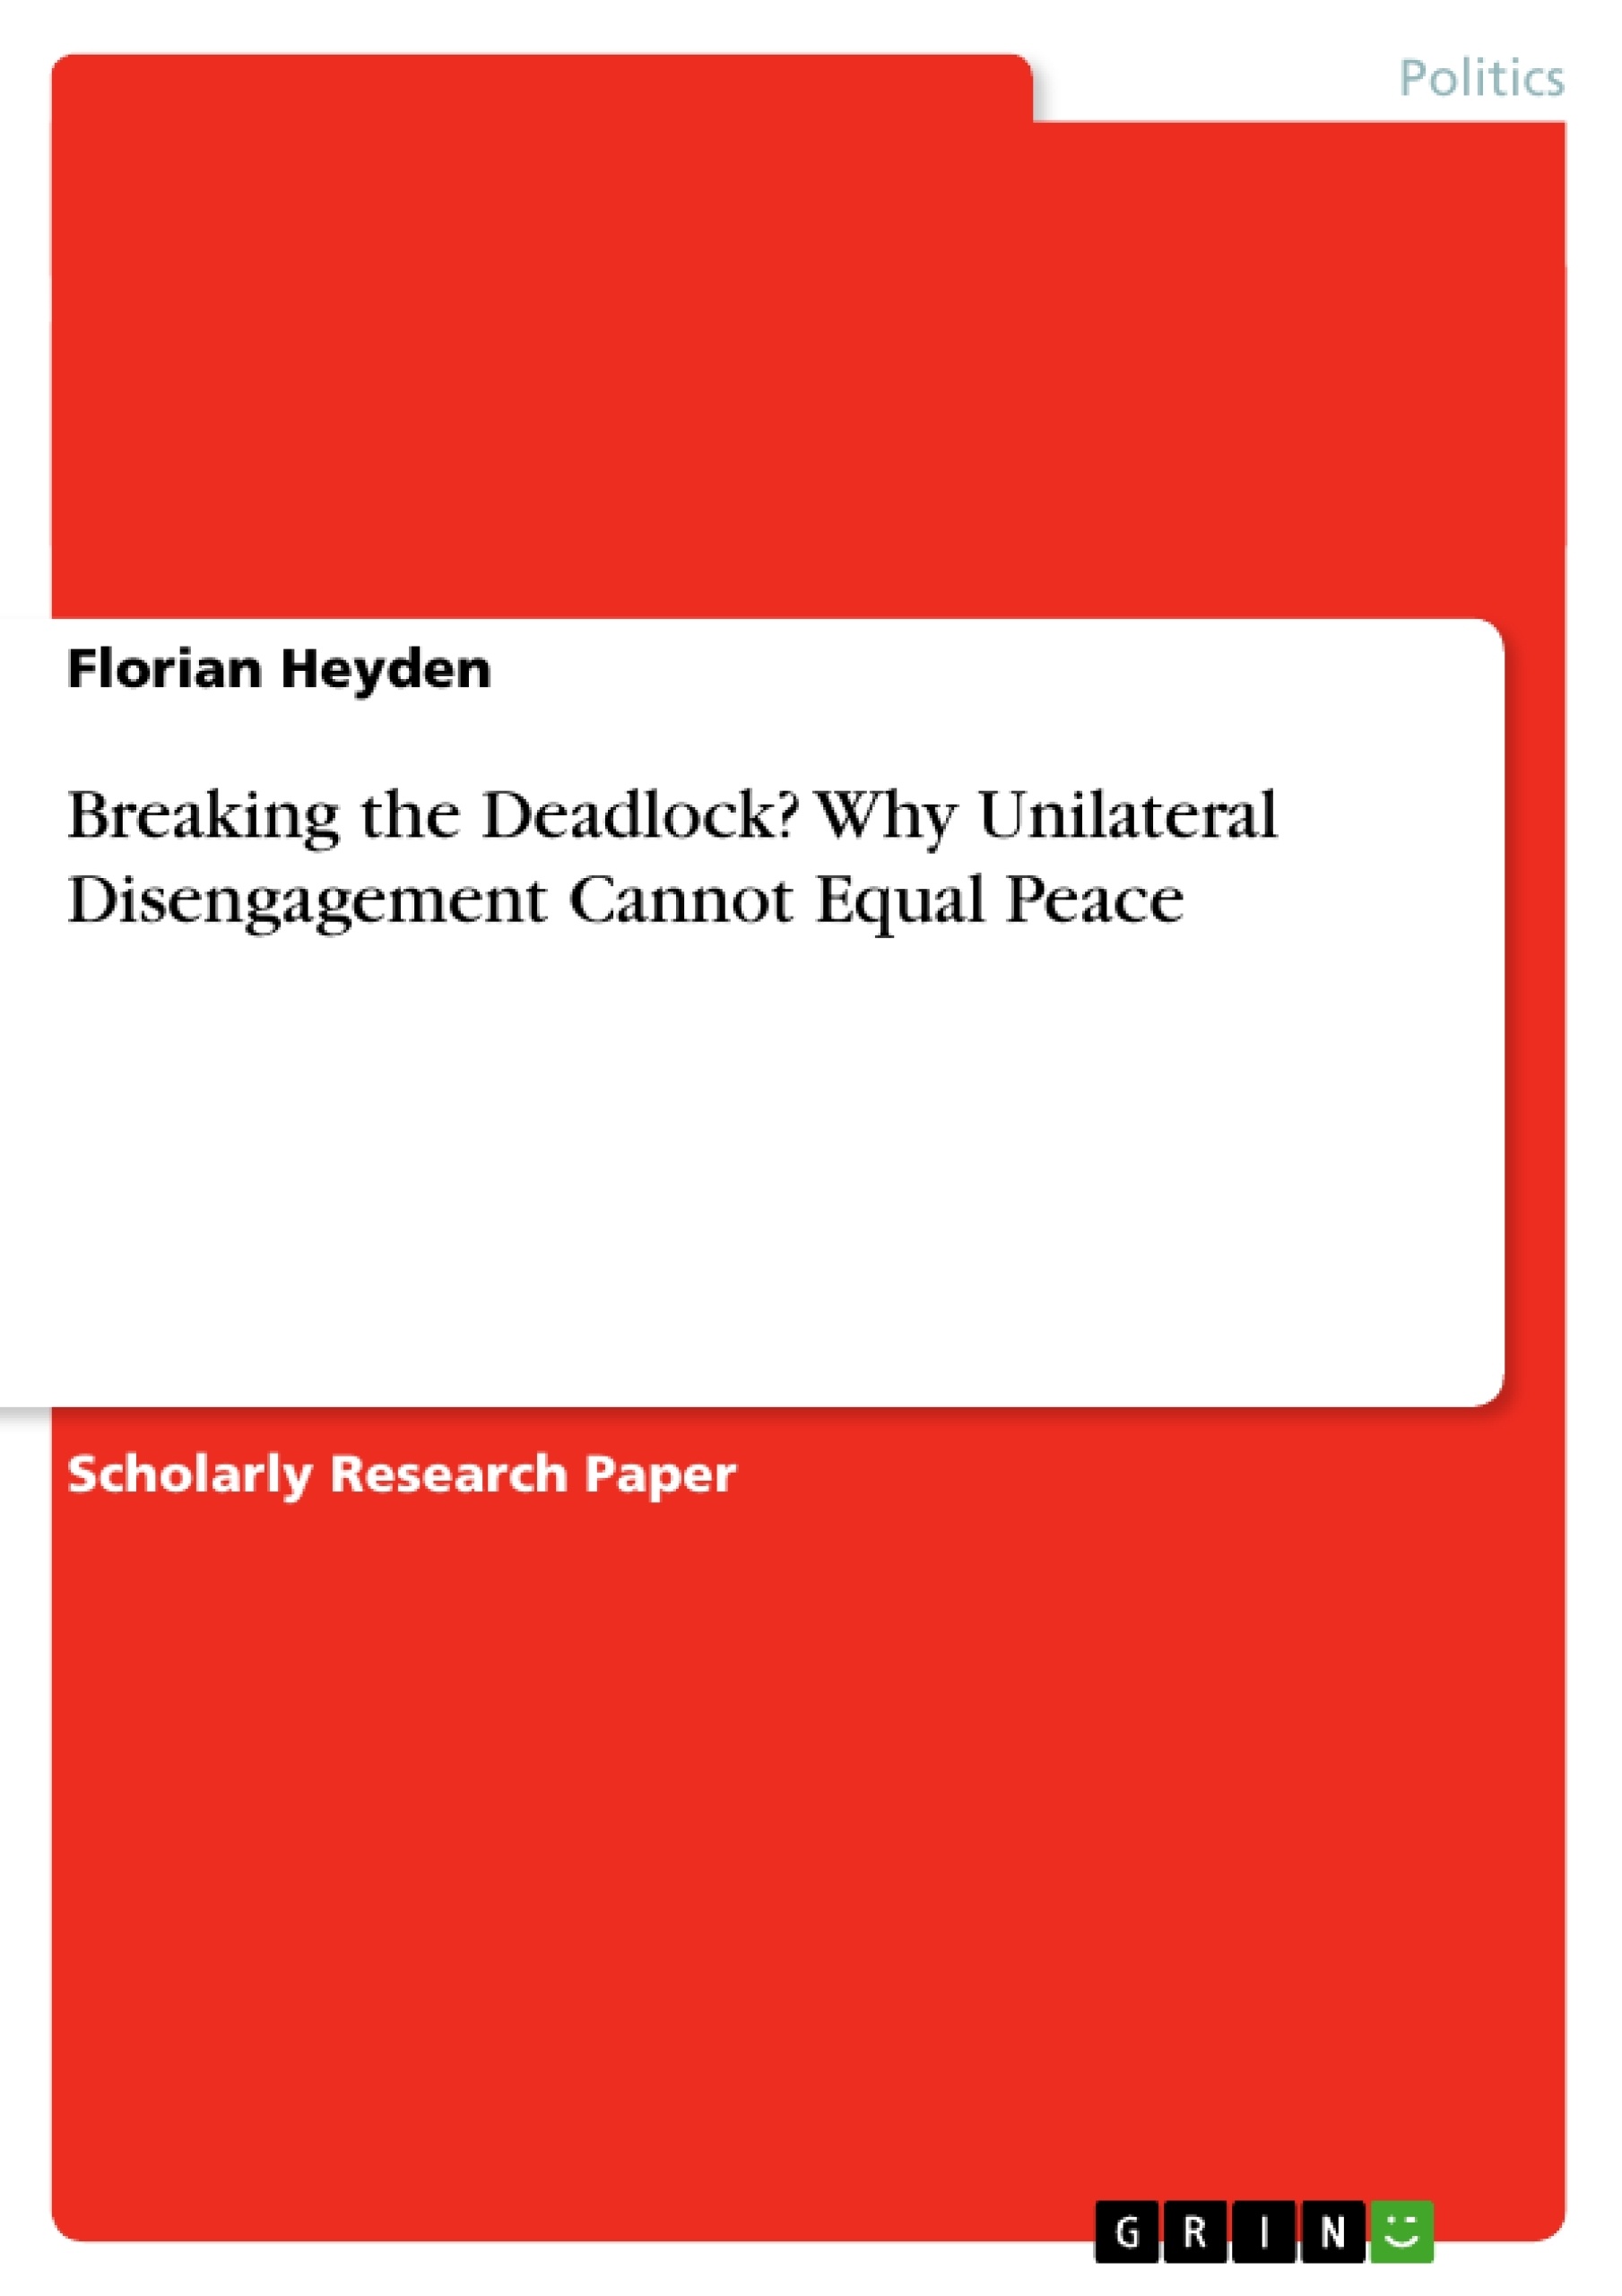 Título: Breaking the Deadlock? Why Unilateral Disengagement Cannot Equal Peace